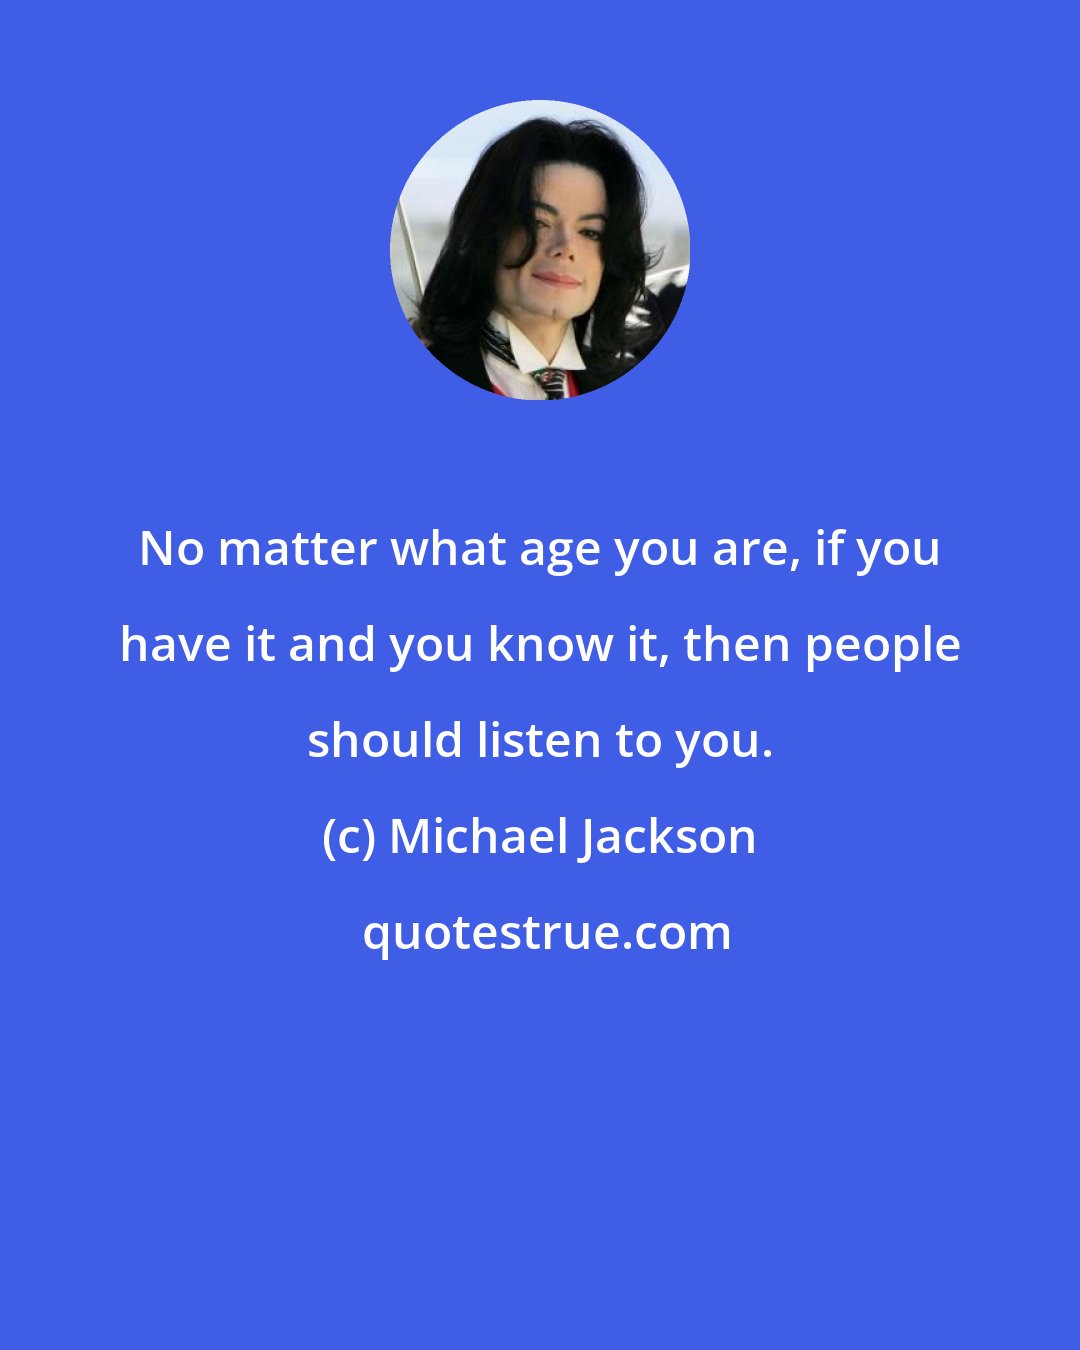 Michael Jackson: No matter what age you are, if you have it and you know it, then people should listen to you.